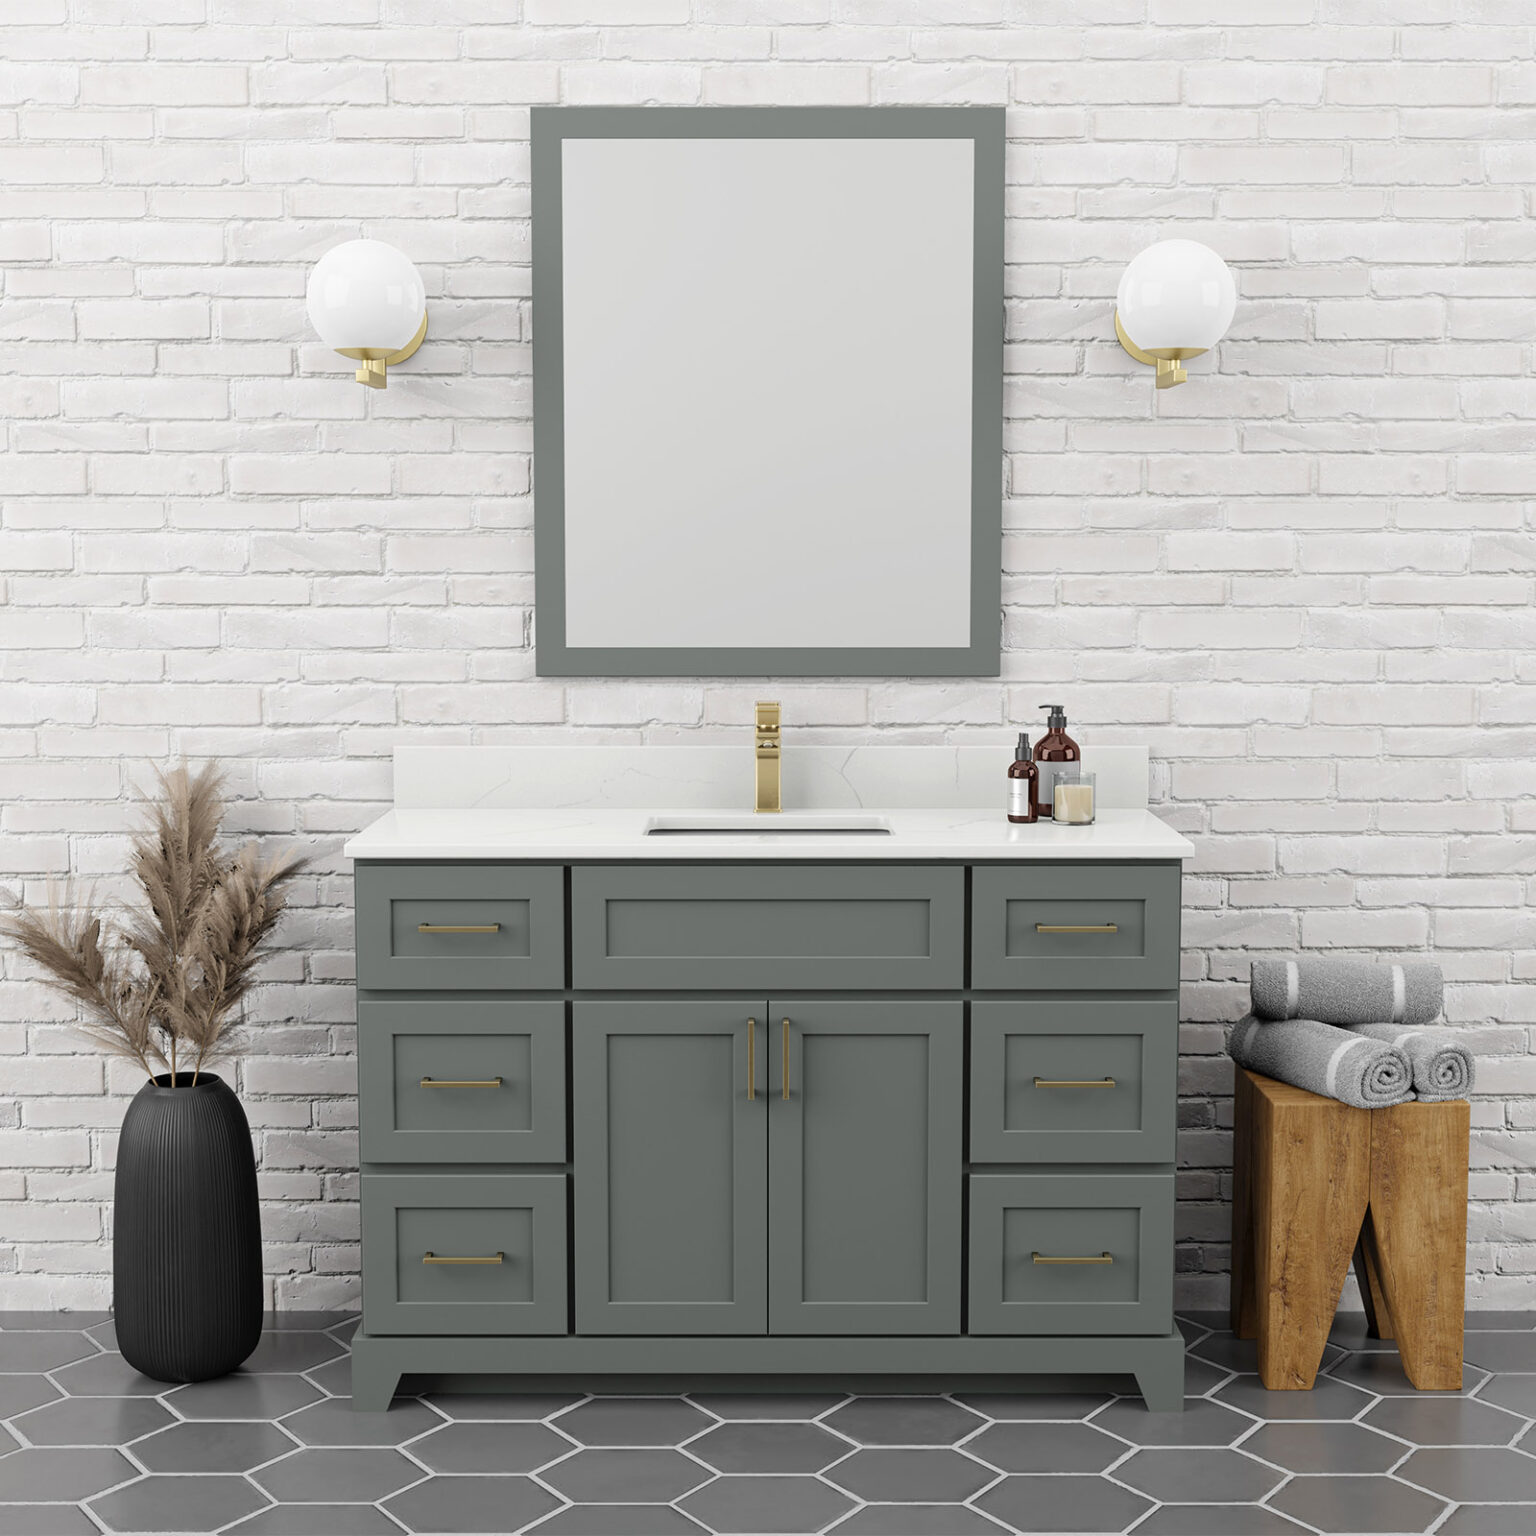 Home - Stonewood Bath Cabinetry